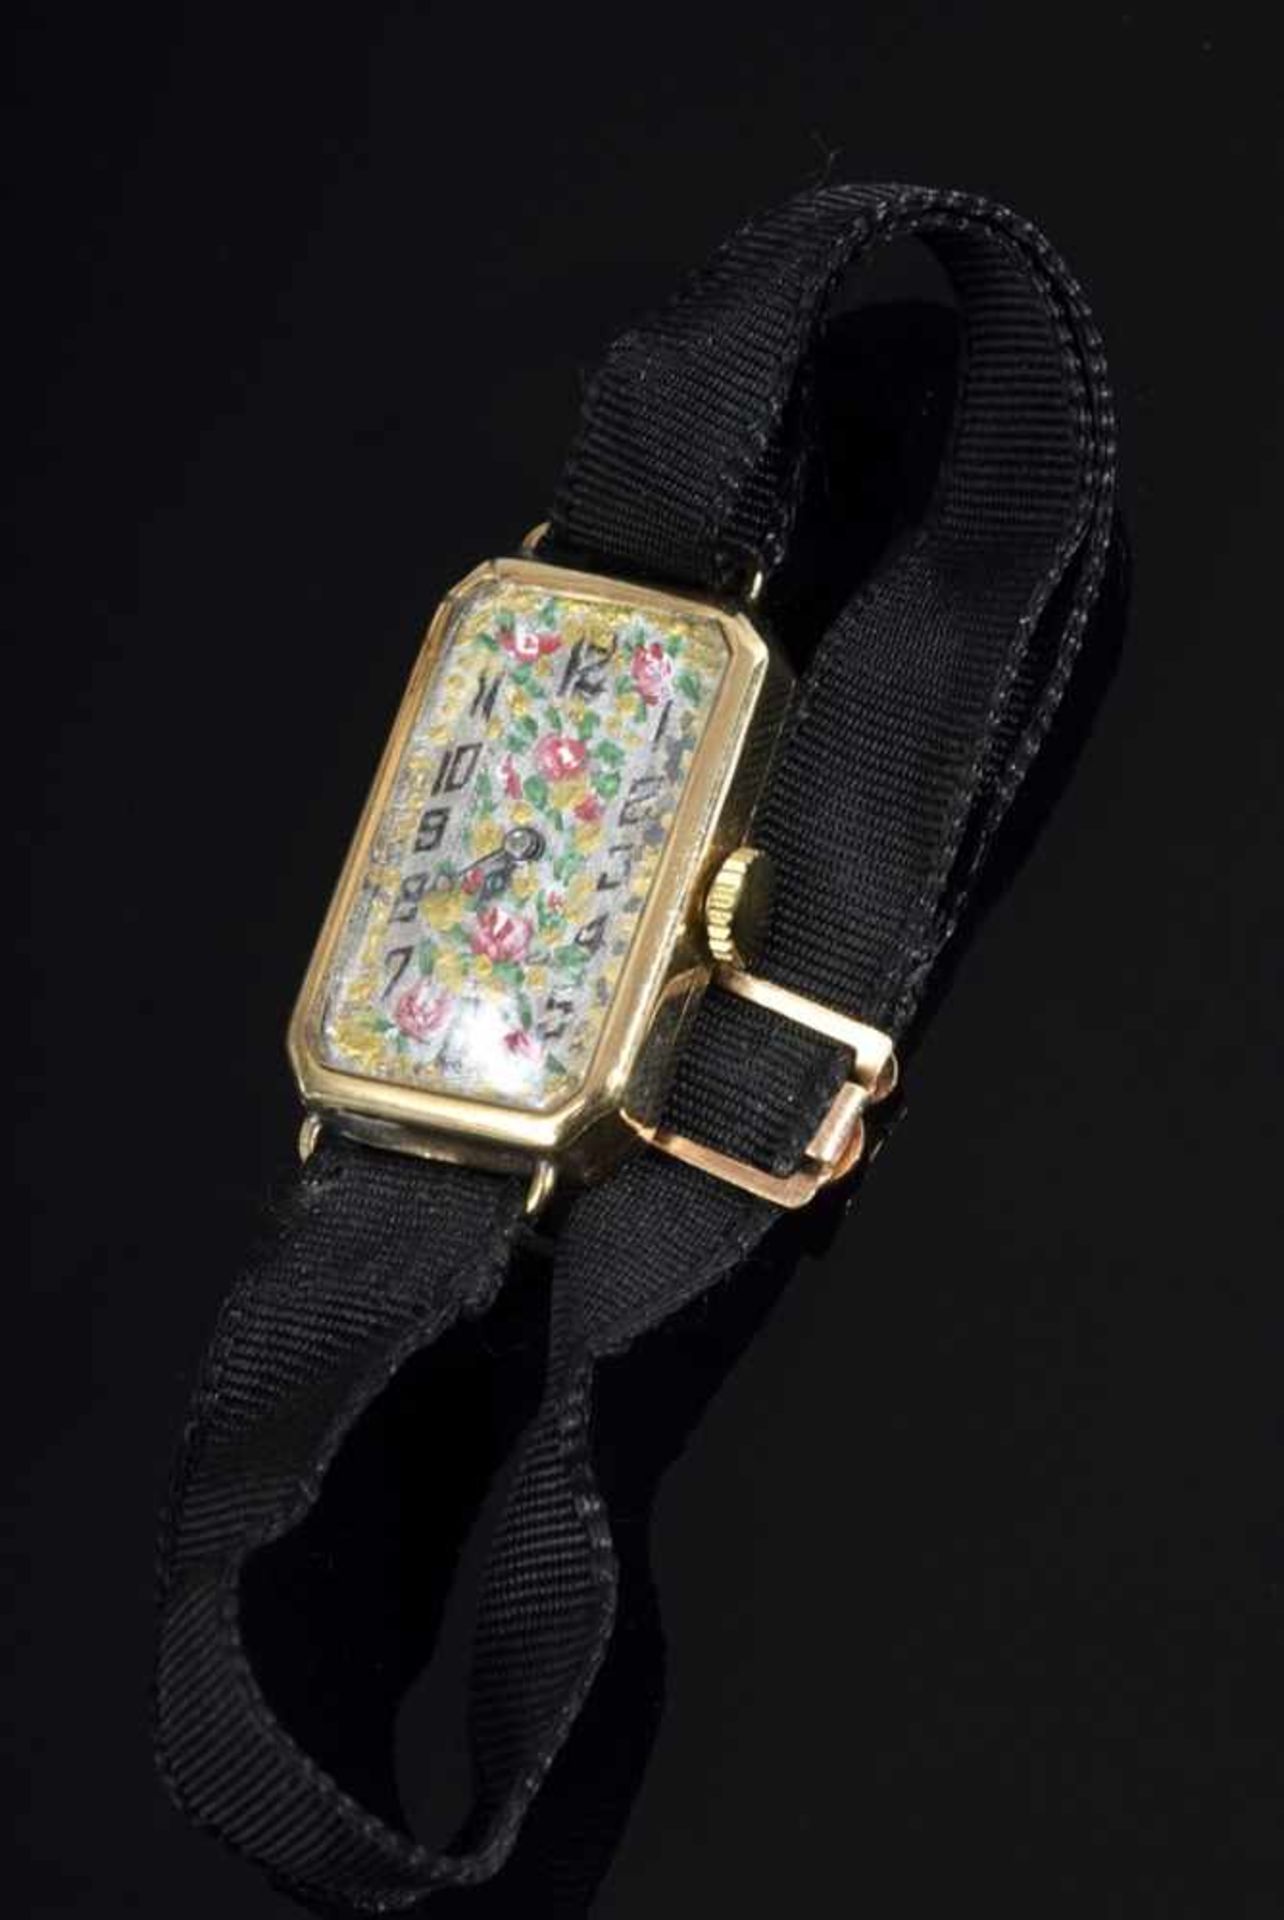 Art Deco RG 375 ladies' watch with floral painted silver dial, black ribbed strap and gold-plated